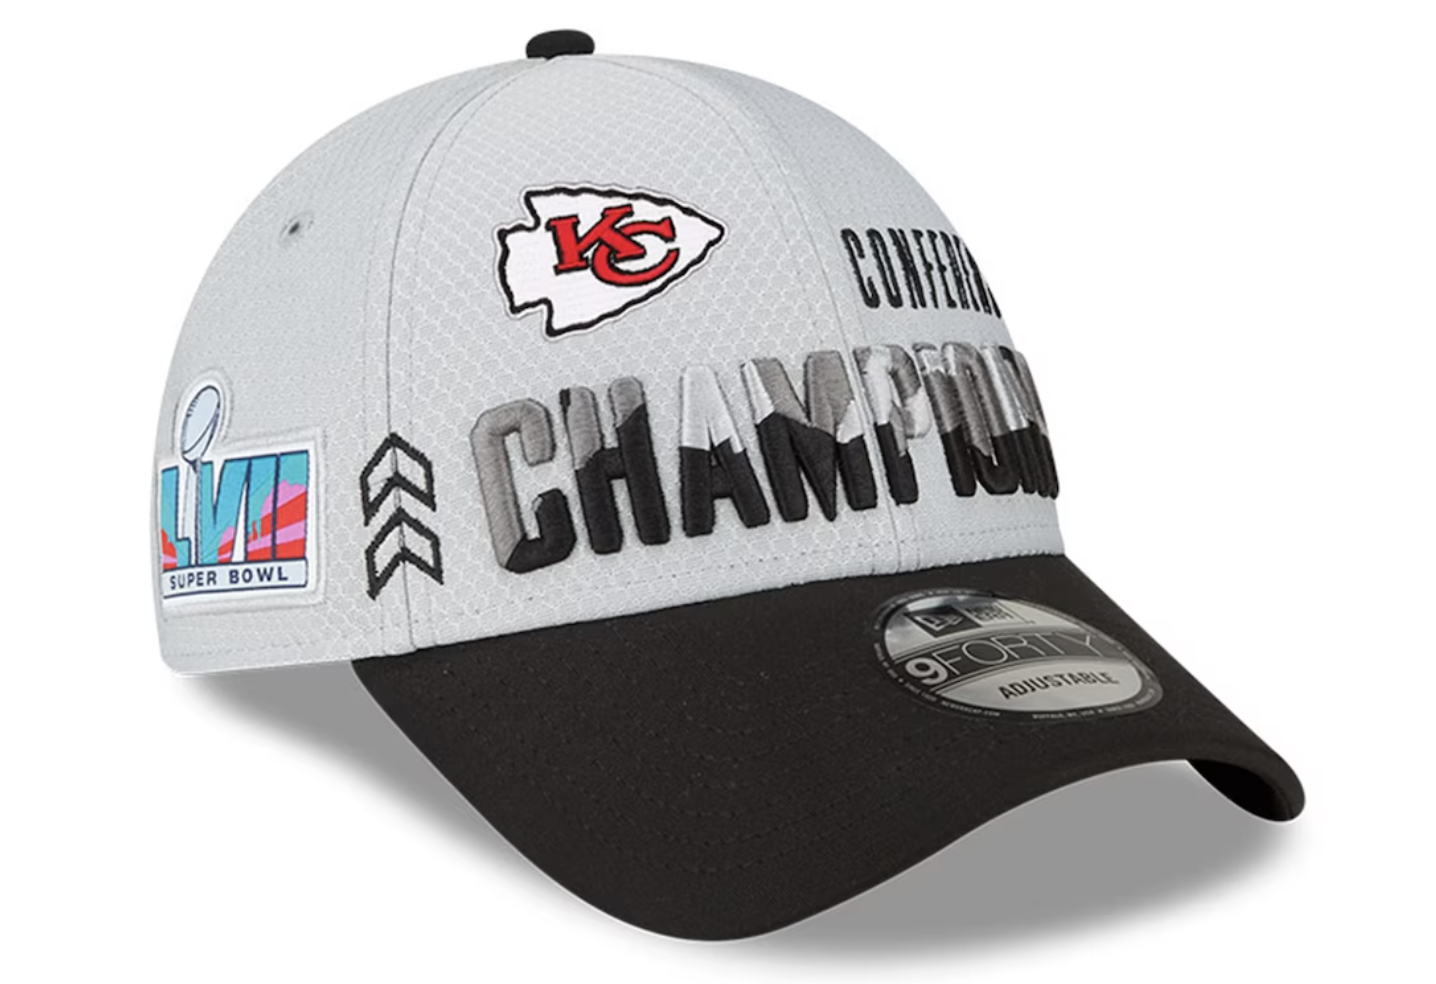 Where to buy Super Bowl LVII hats online: Eagles vs. Chiefs gear